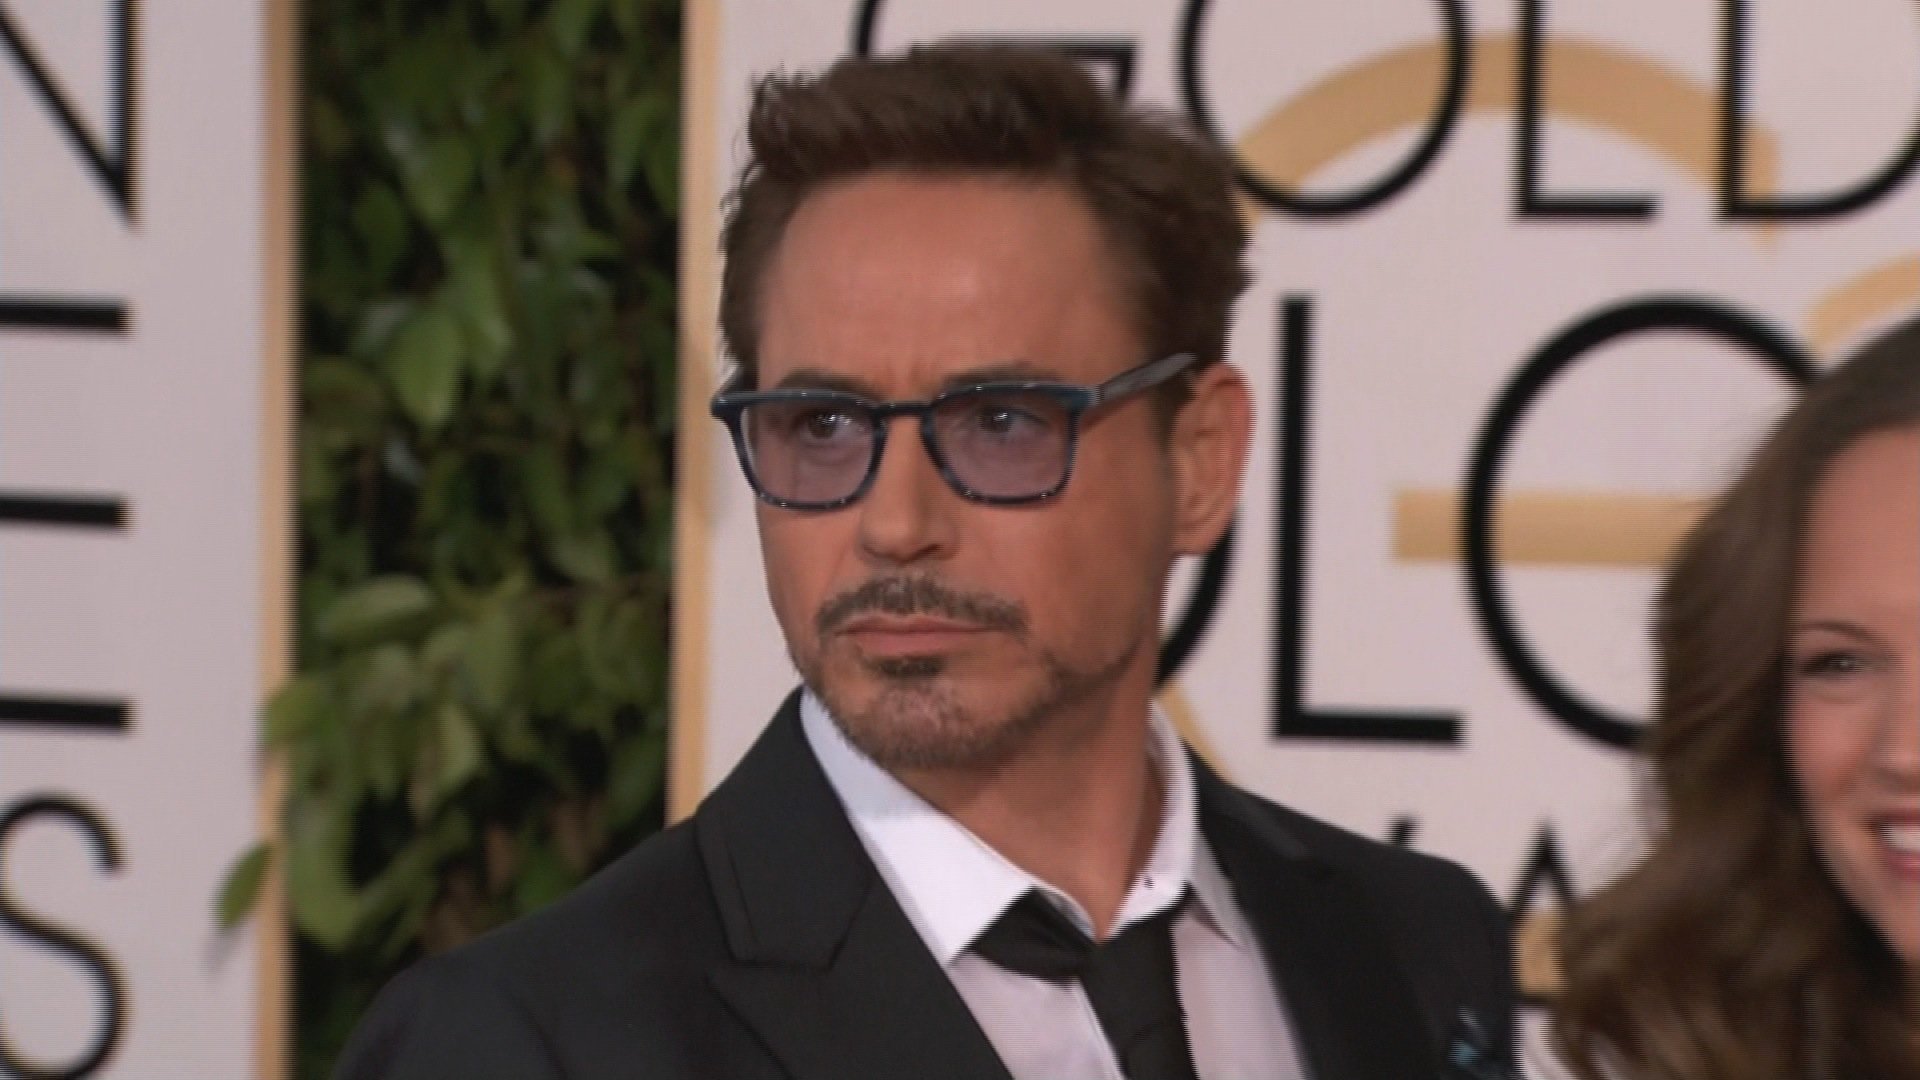 Robert Downey Jr. on the red carpet before the 2015 Golden Globe Awards in Los Angeles, CA, January 11, 2015.